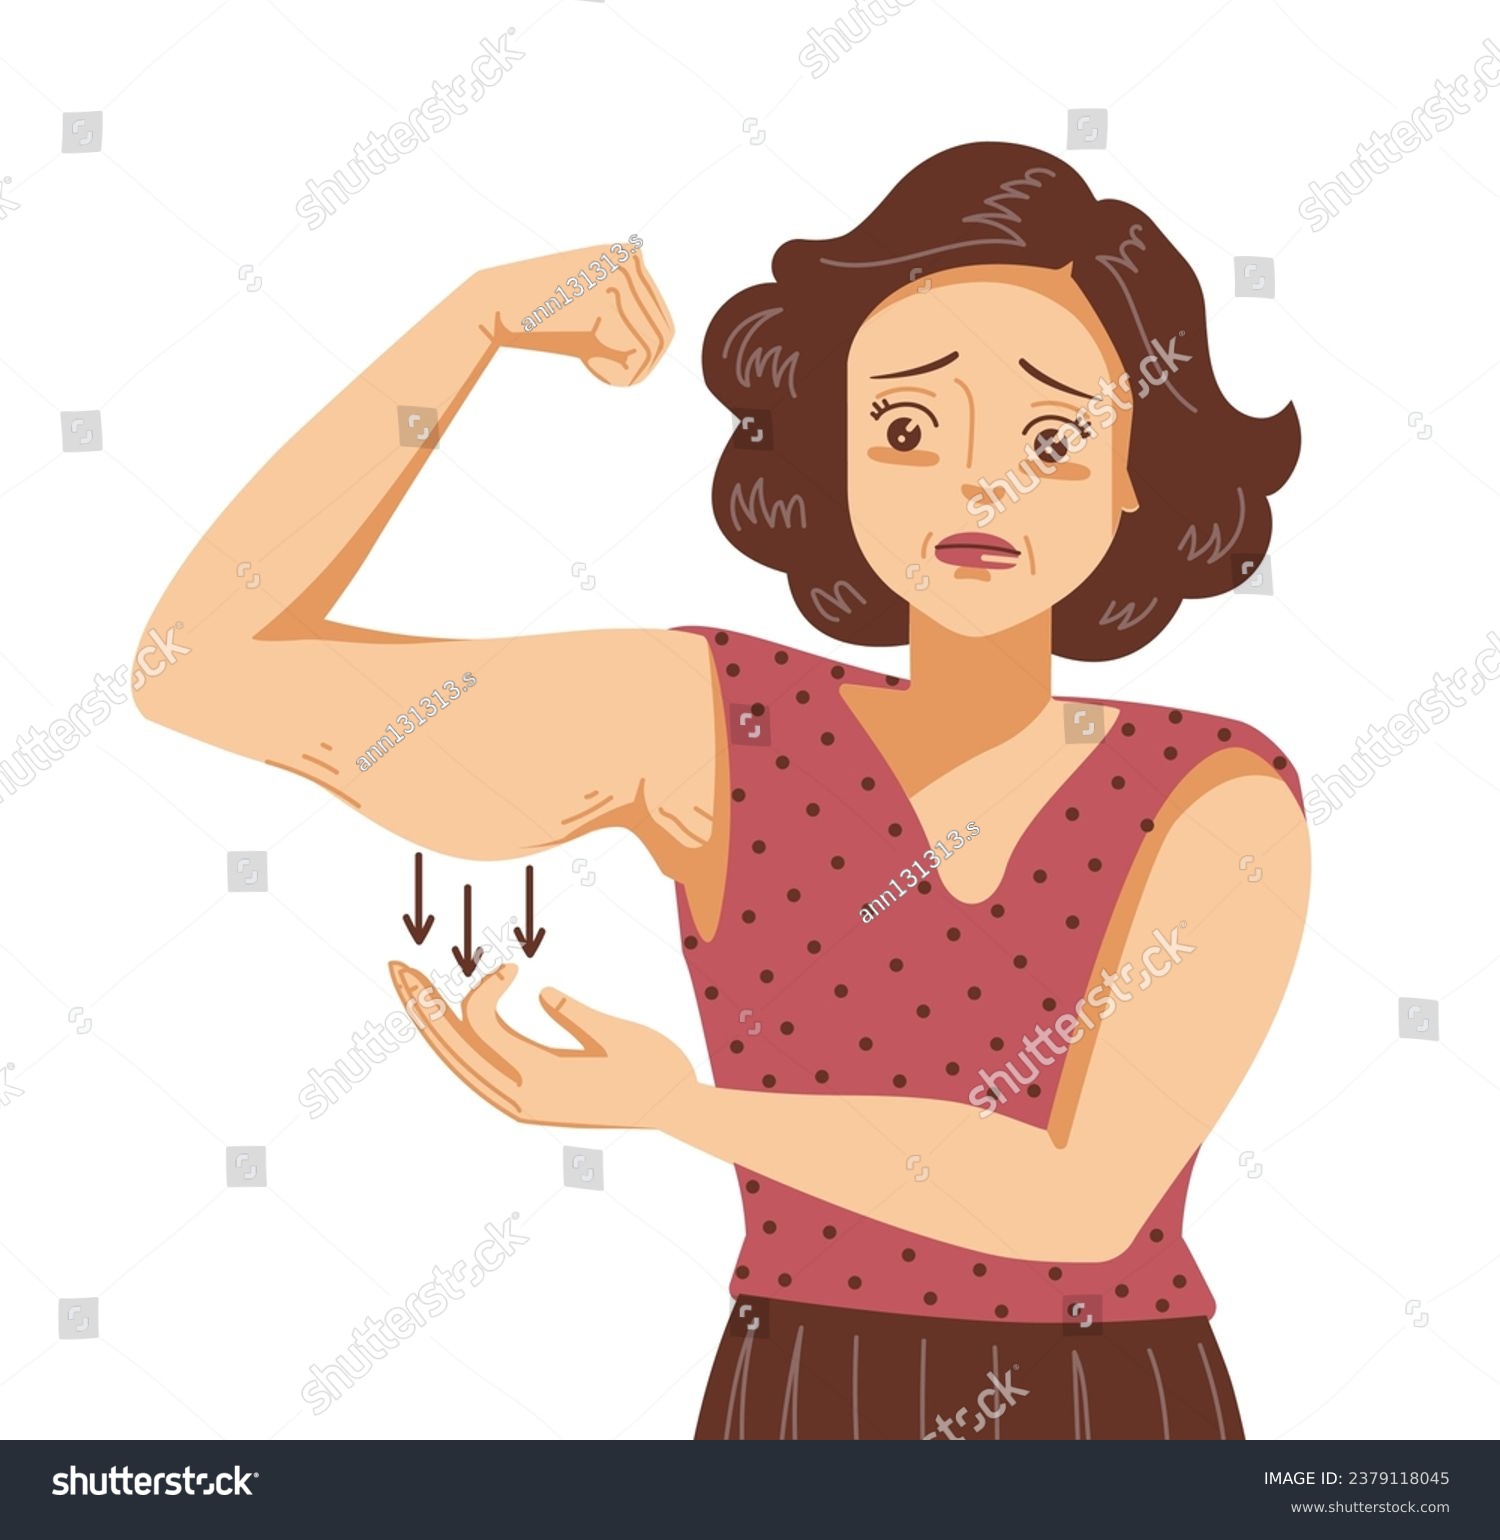 SVG of Woman snatches fat, flabby skin from arm svg